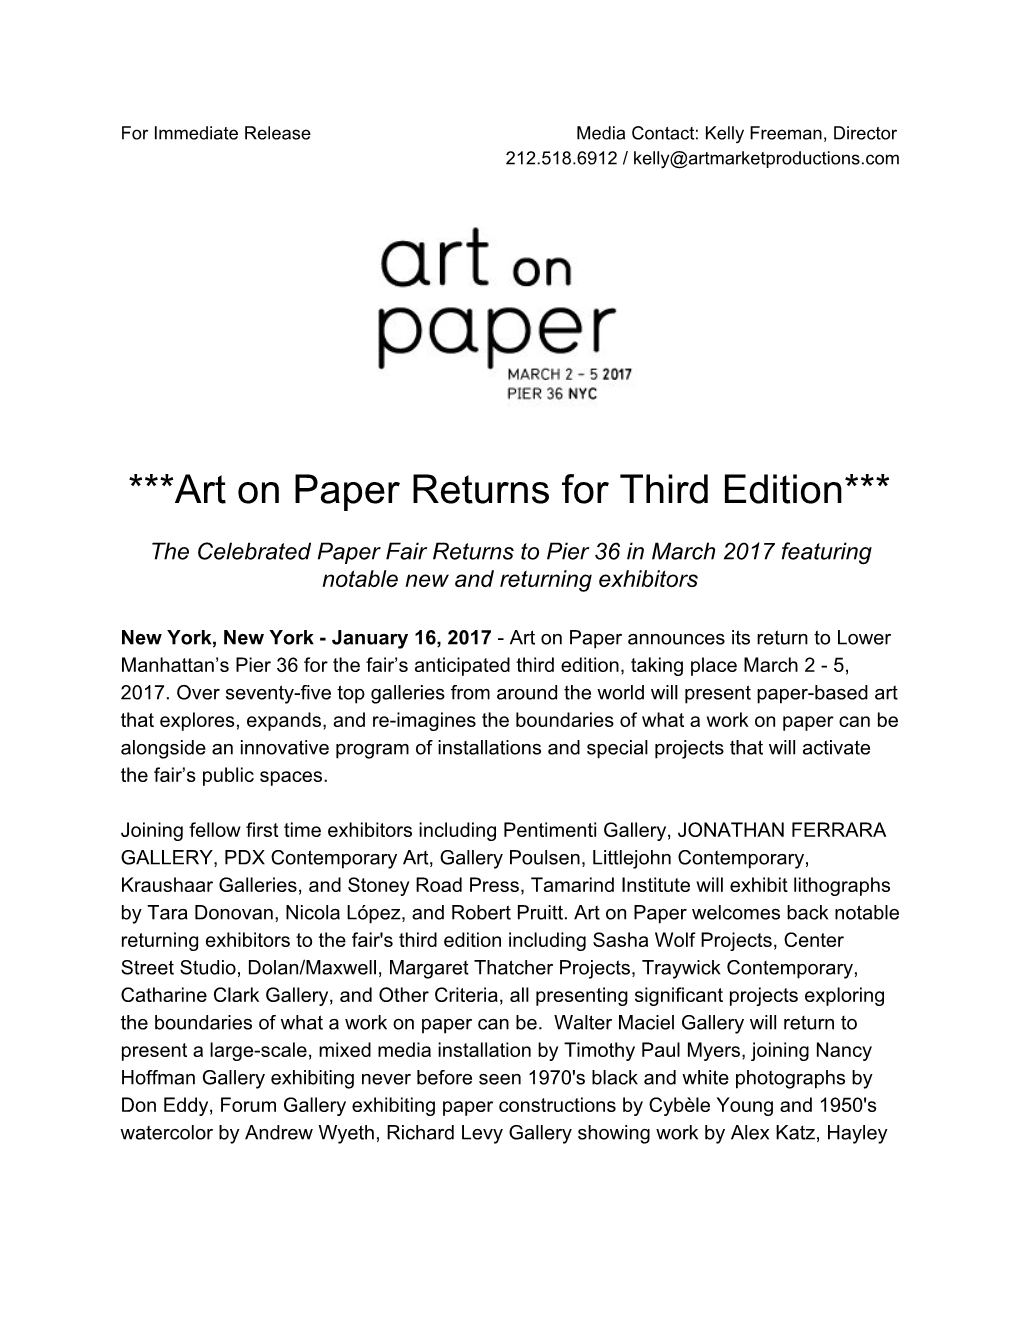 Art on Paper Returns for Third Edition***